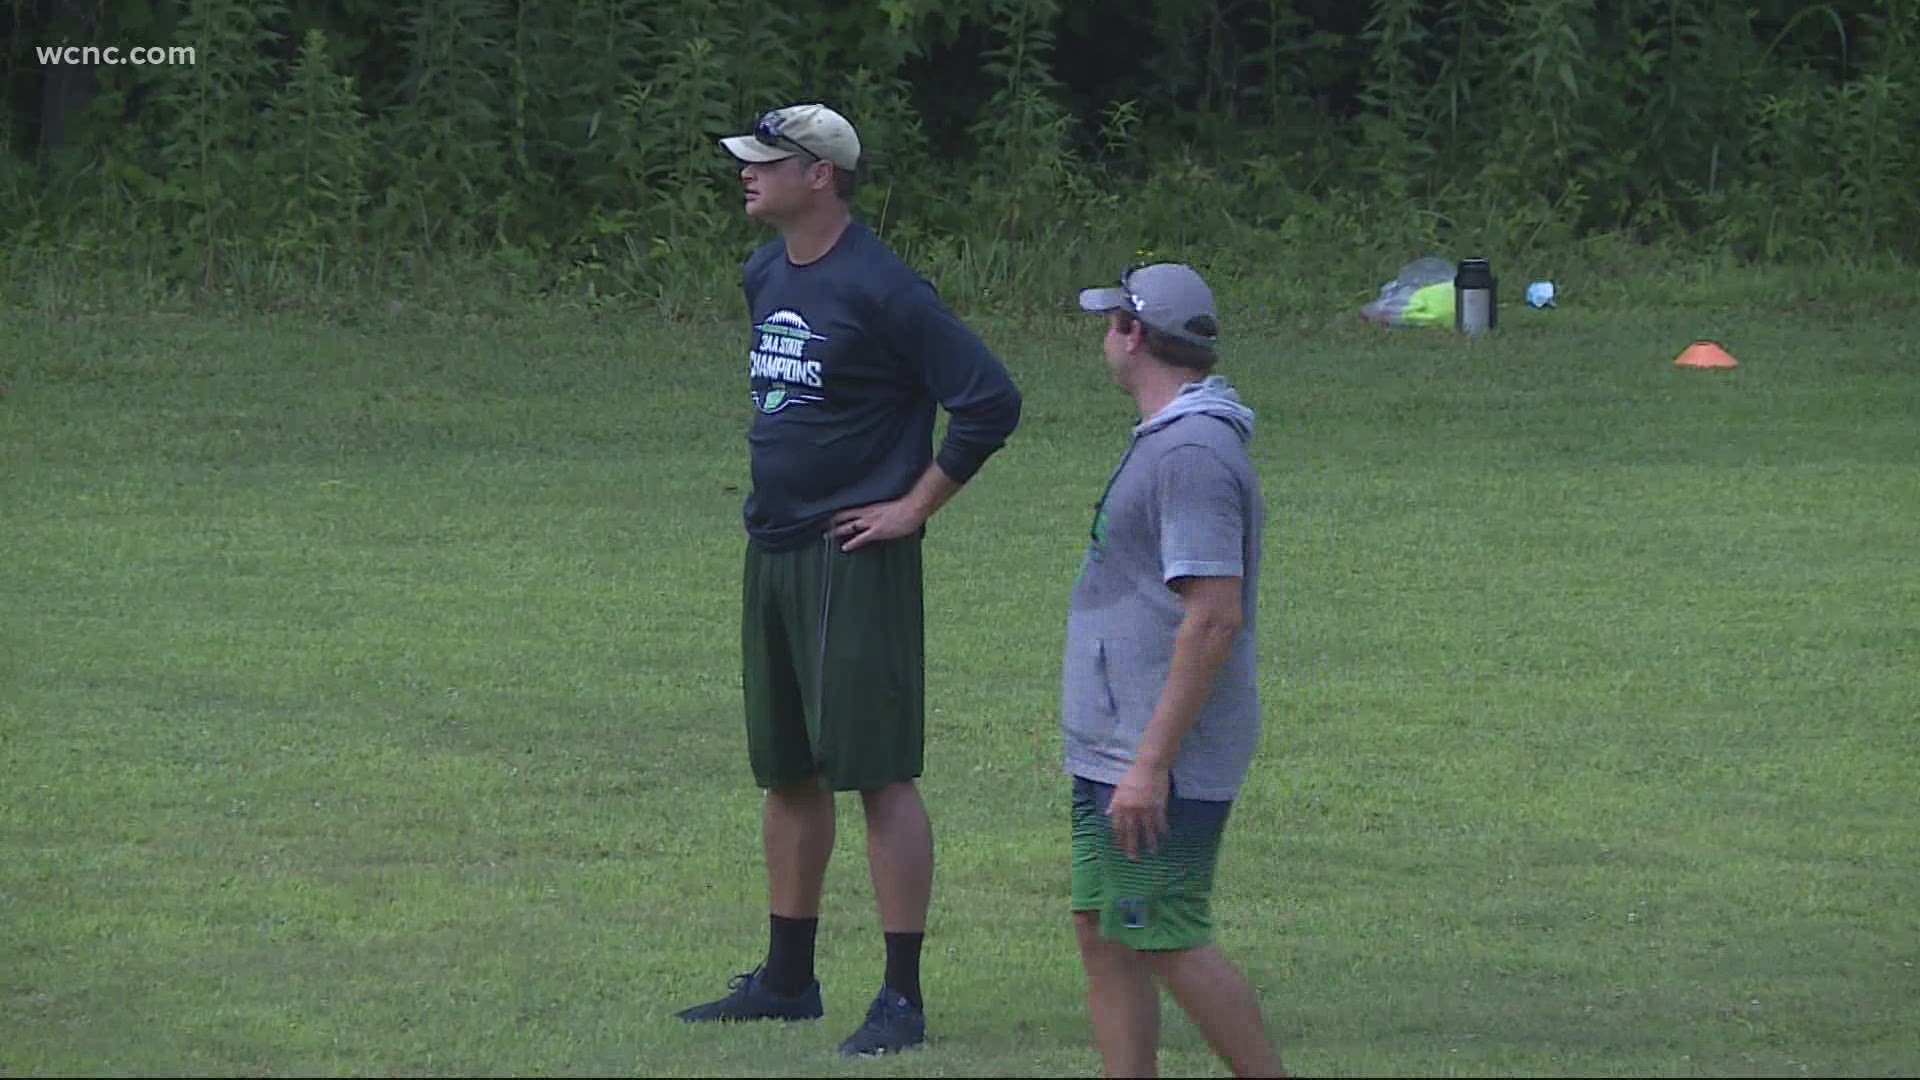 Weddington Football started conditioning drills on July 6, as allowed by Union County Public Schools